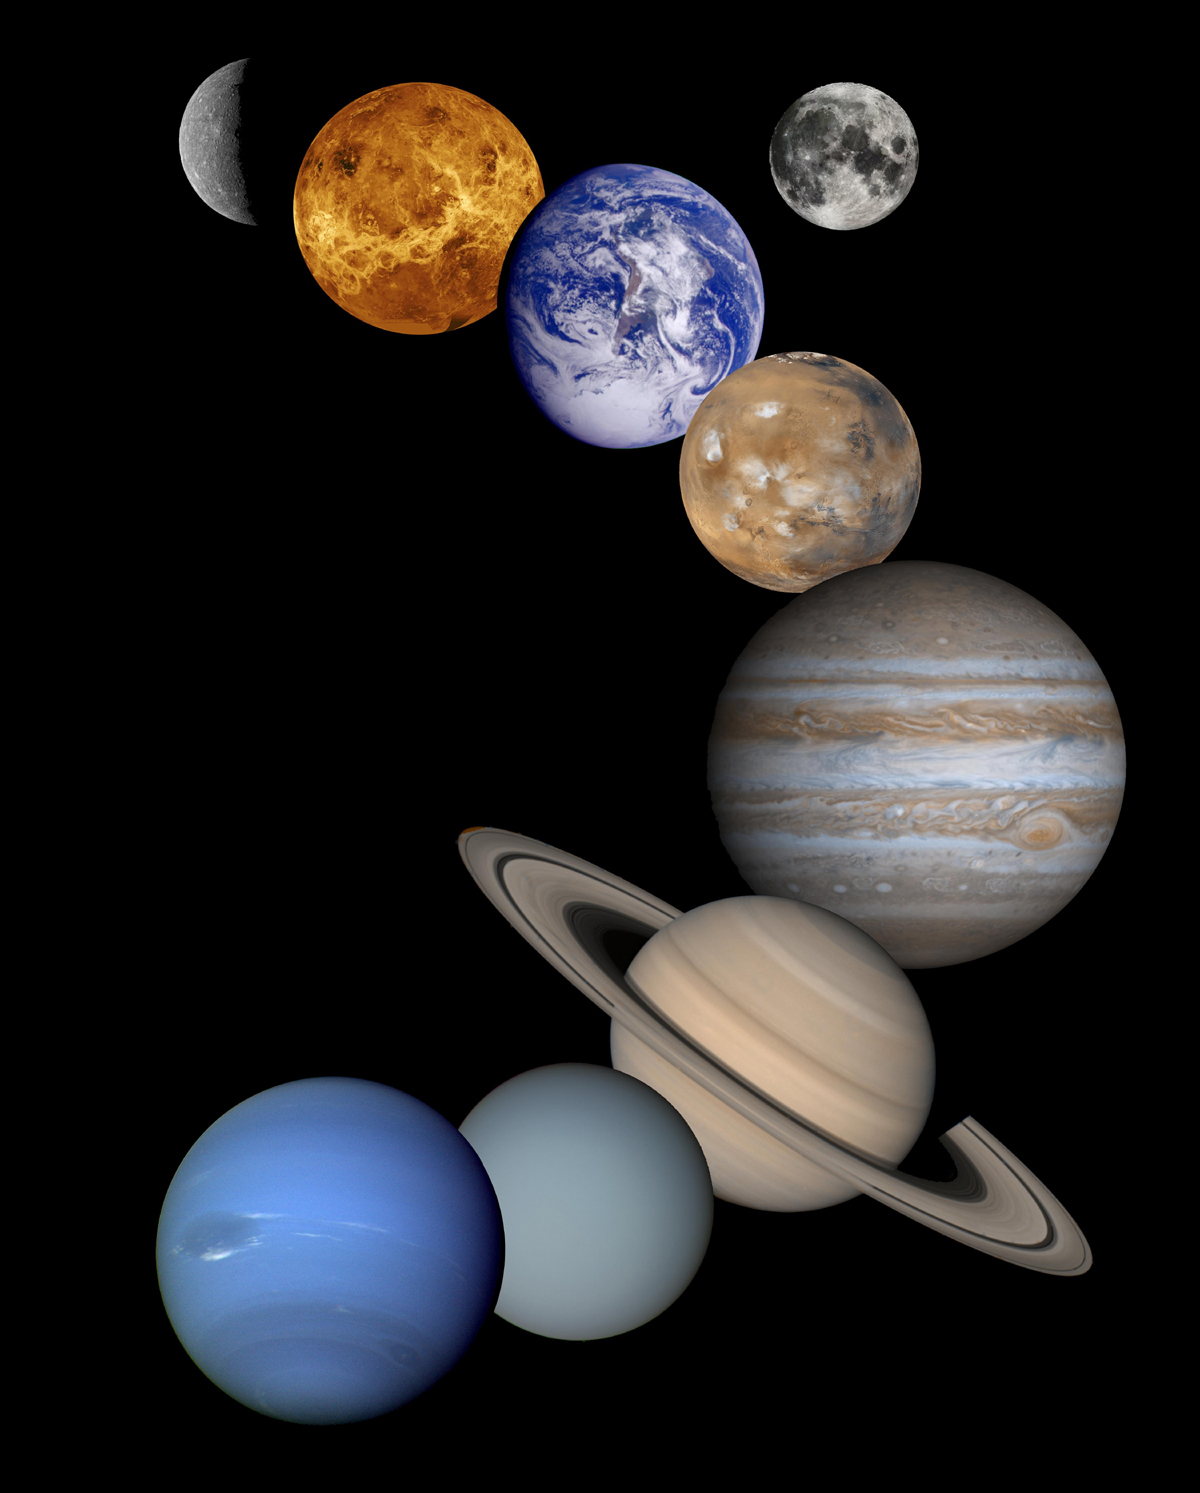  A montage of the Solar System